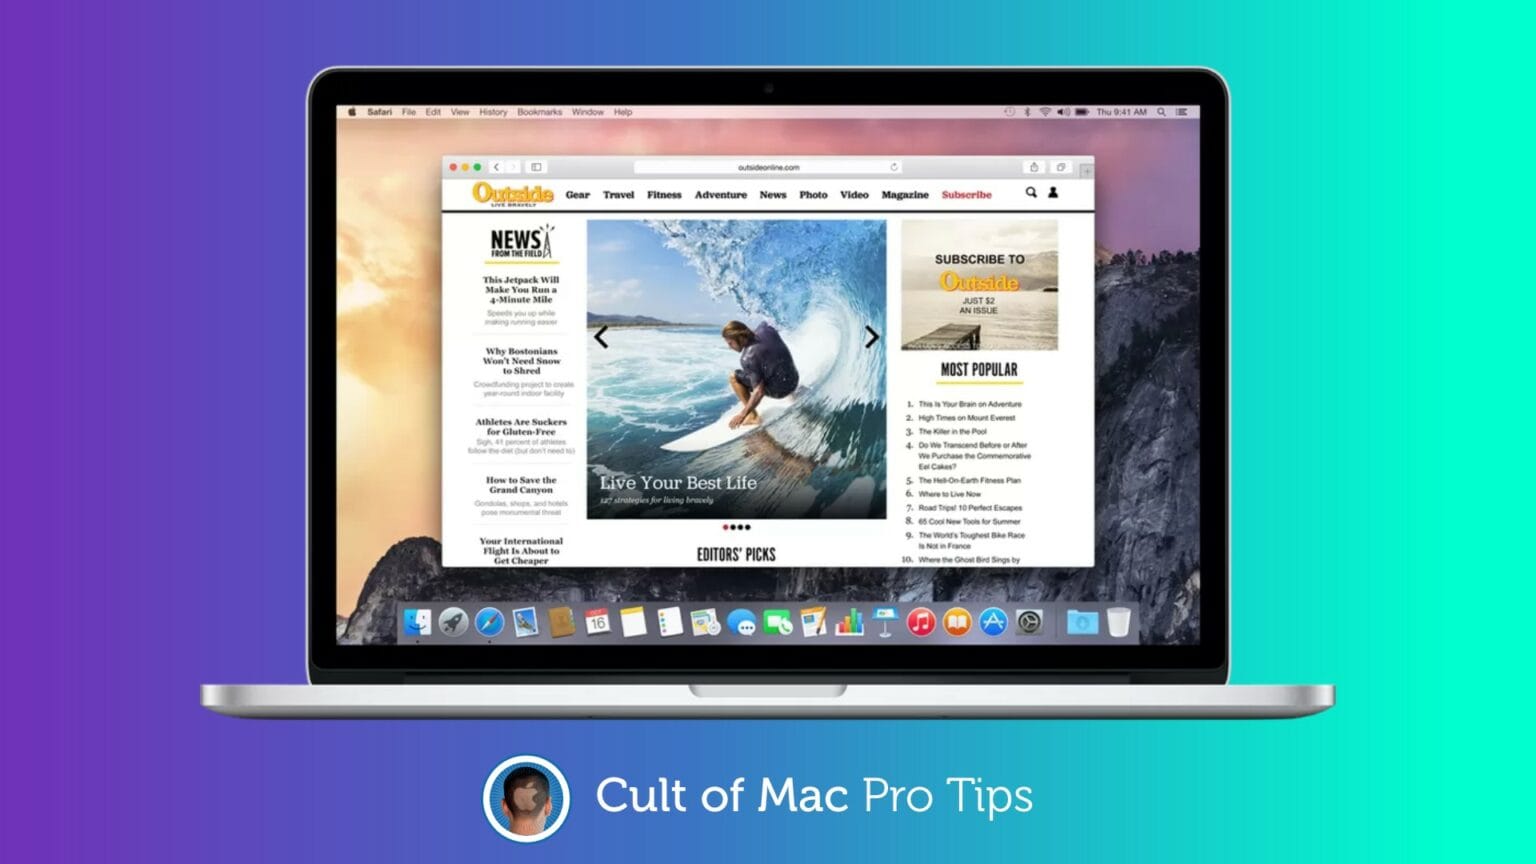 Switch browsers to speed up an old Mac